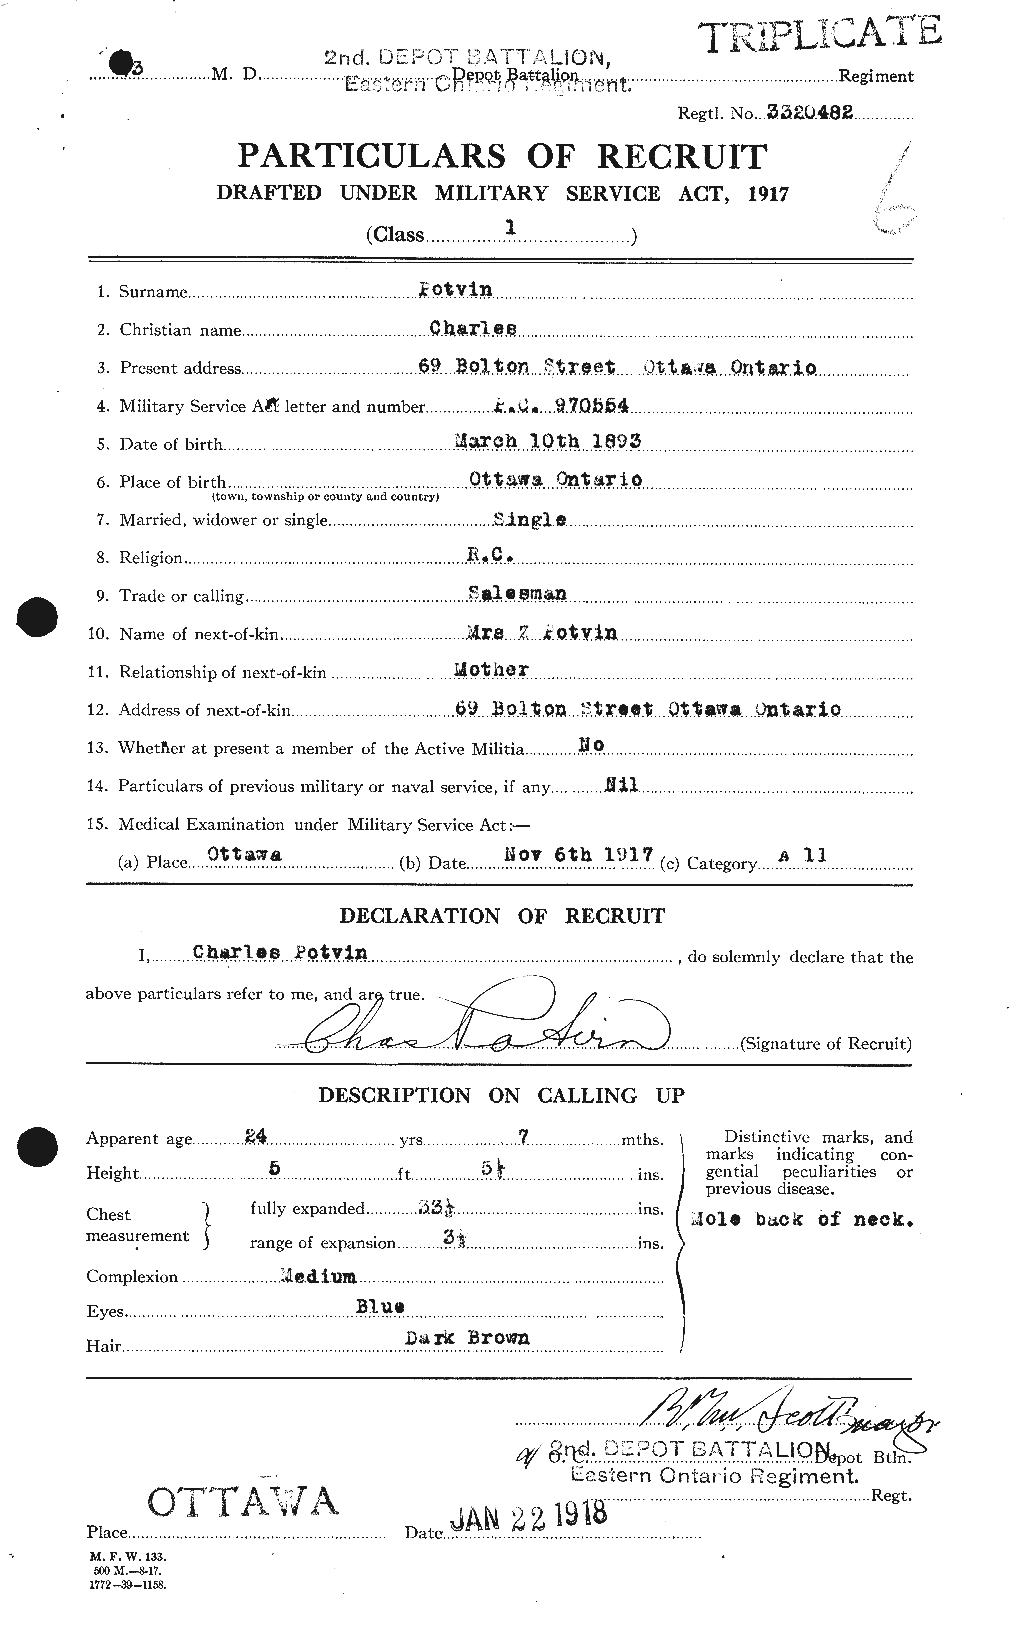 Personnel Records of the First World War - CEF 584617a